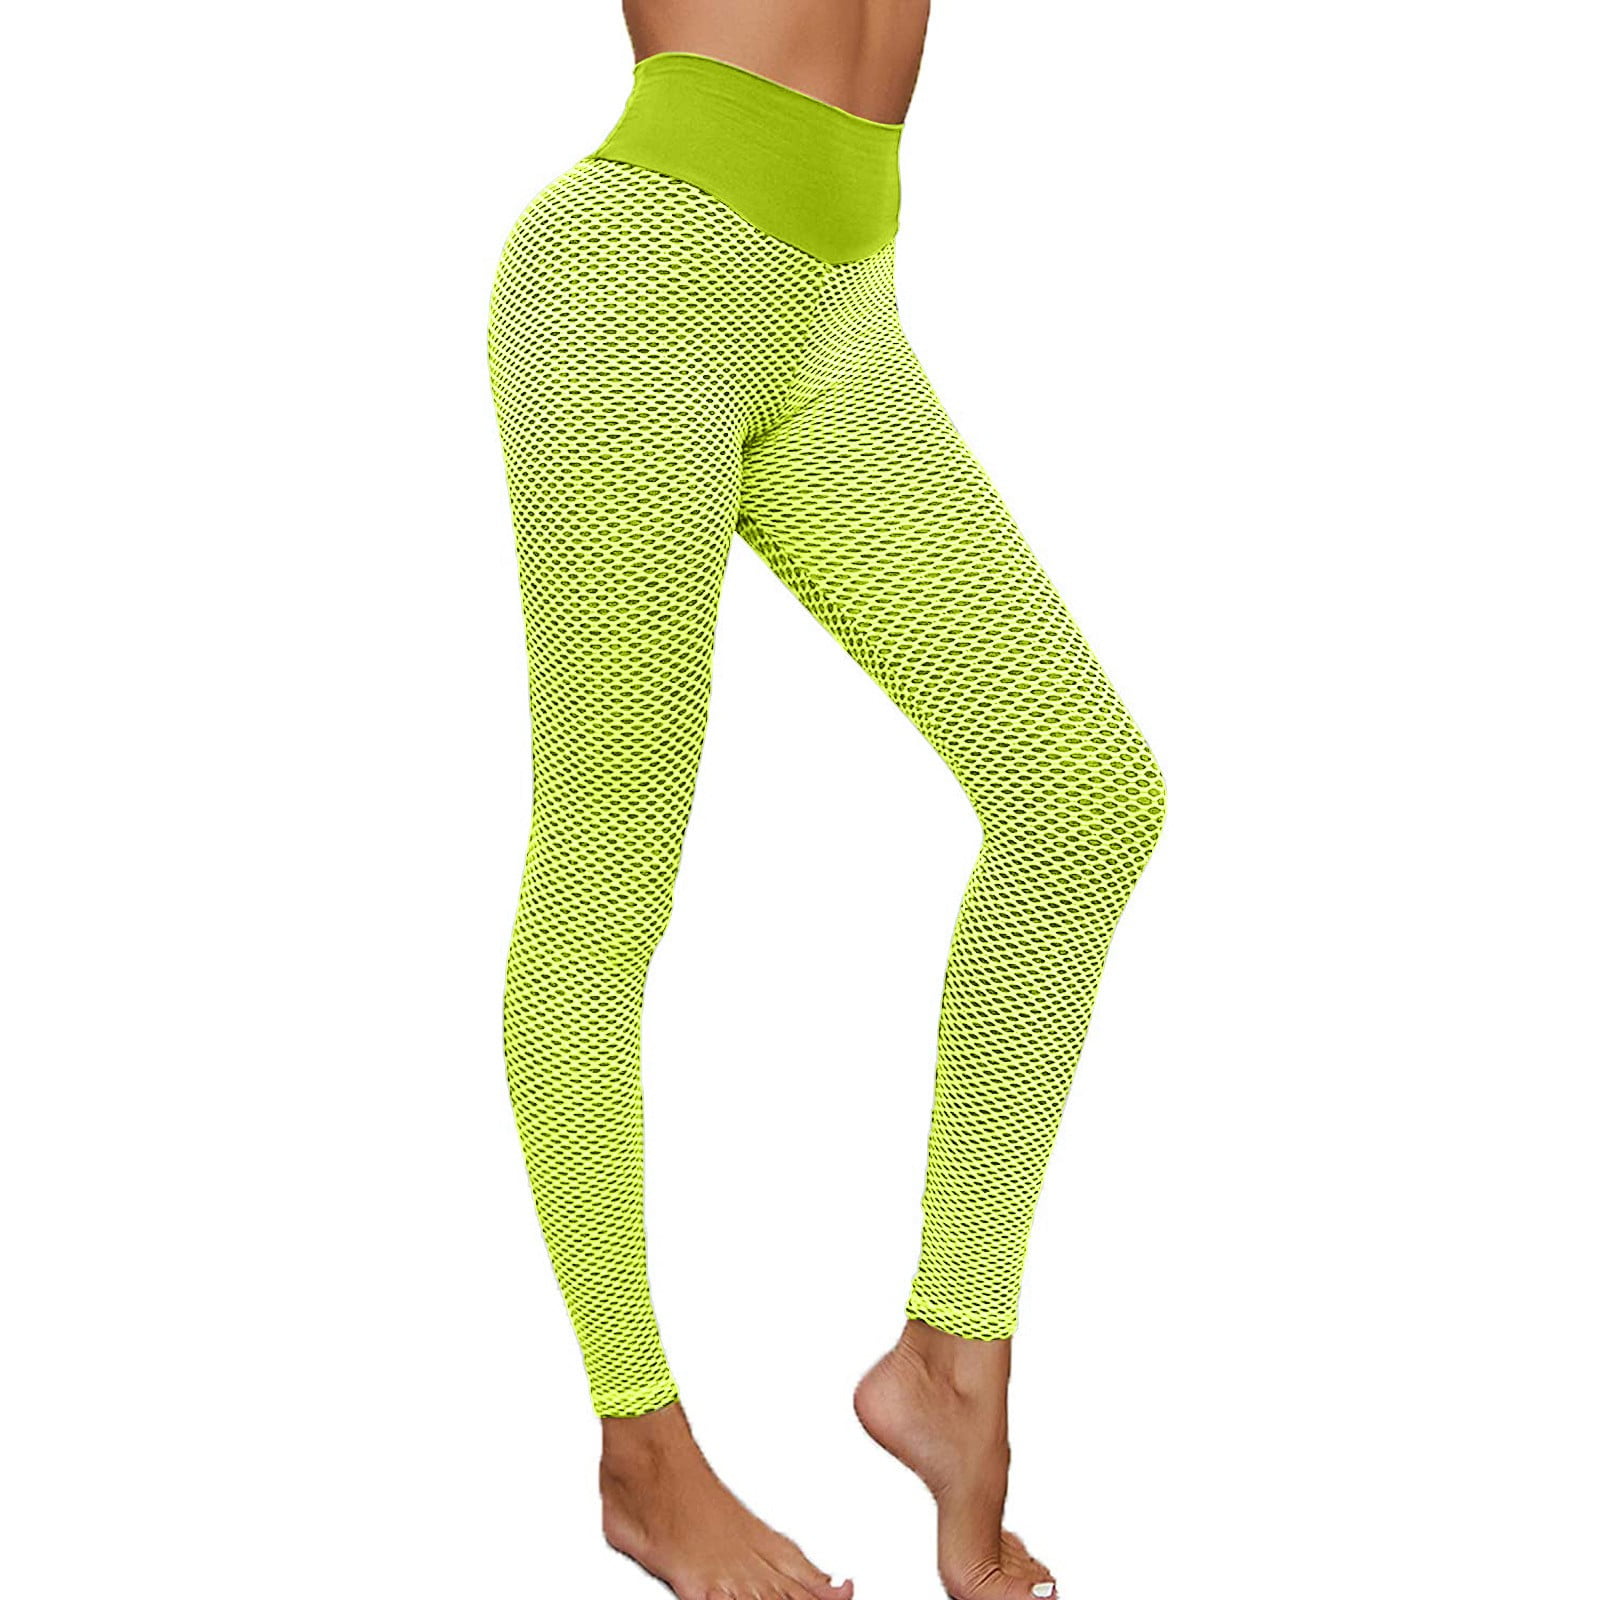 KaLI_store Yoga Pants Leggings with Pockets for Women, High